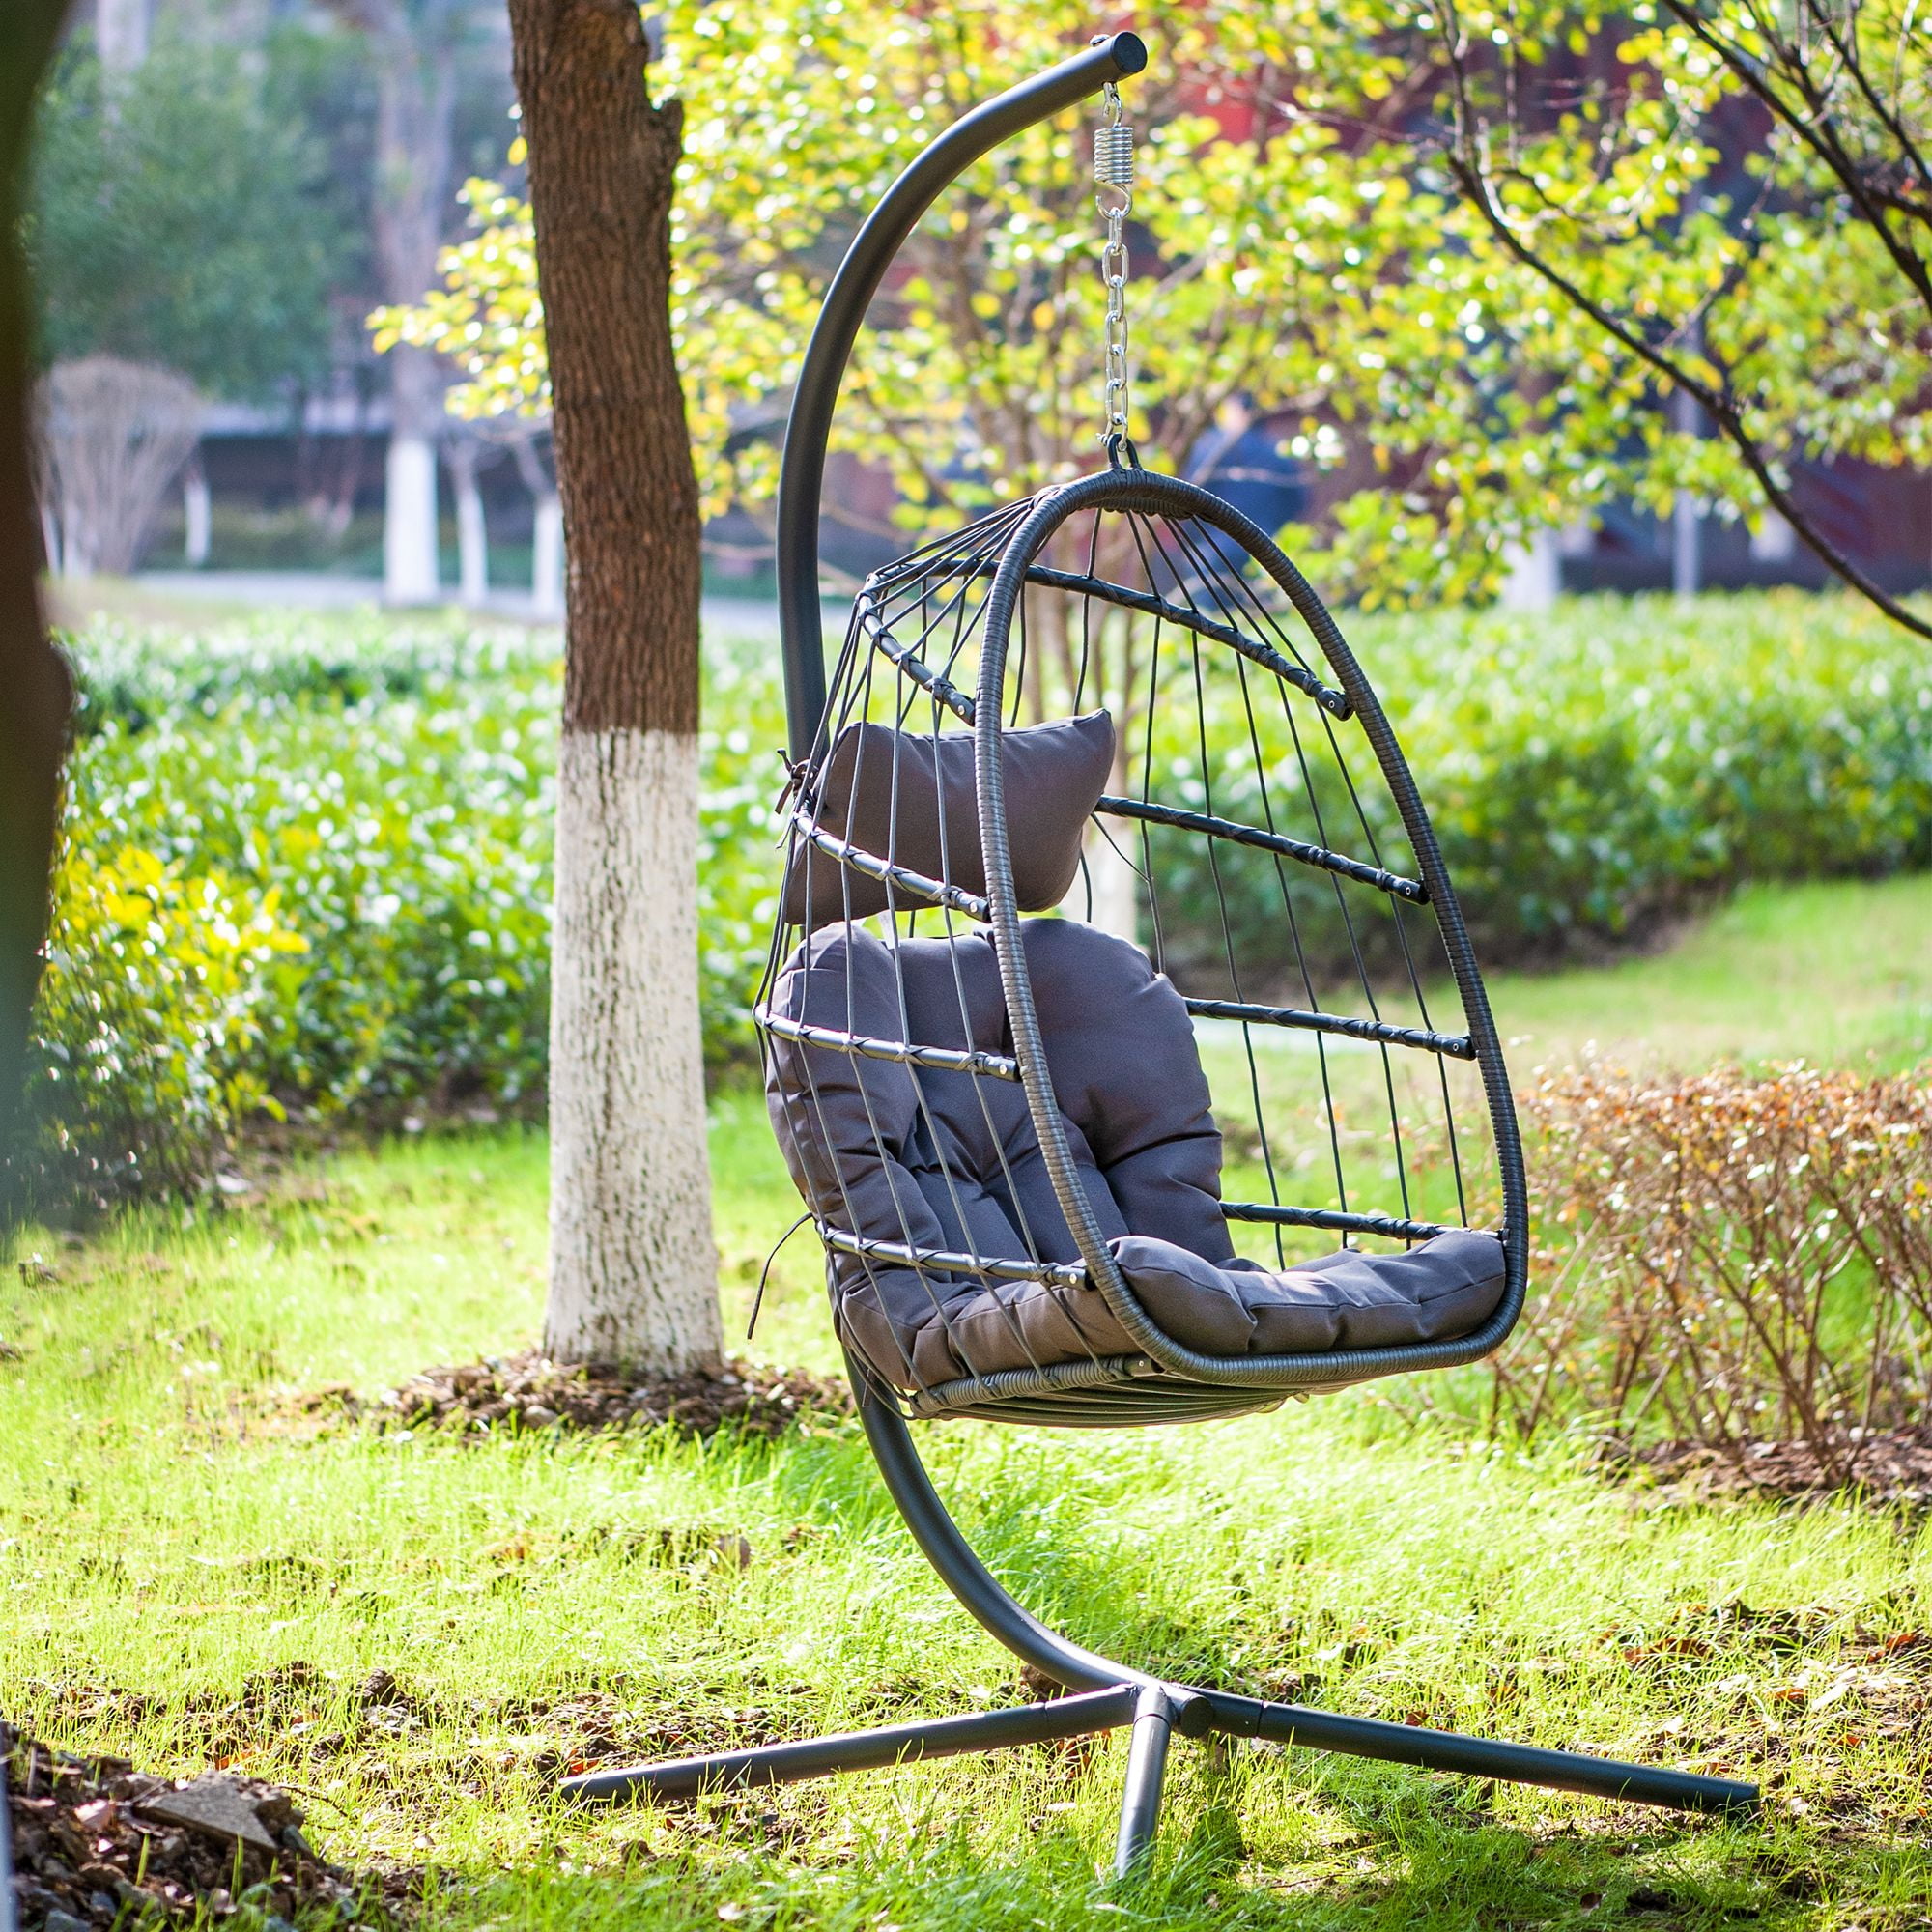 Hanging Chaise Lounger Egg Chair for Garden, Outdoor Wicker Swing Egg